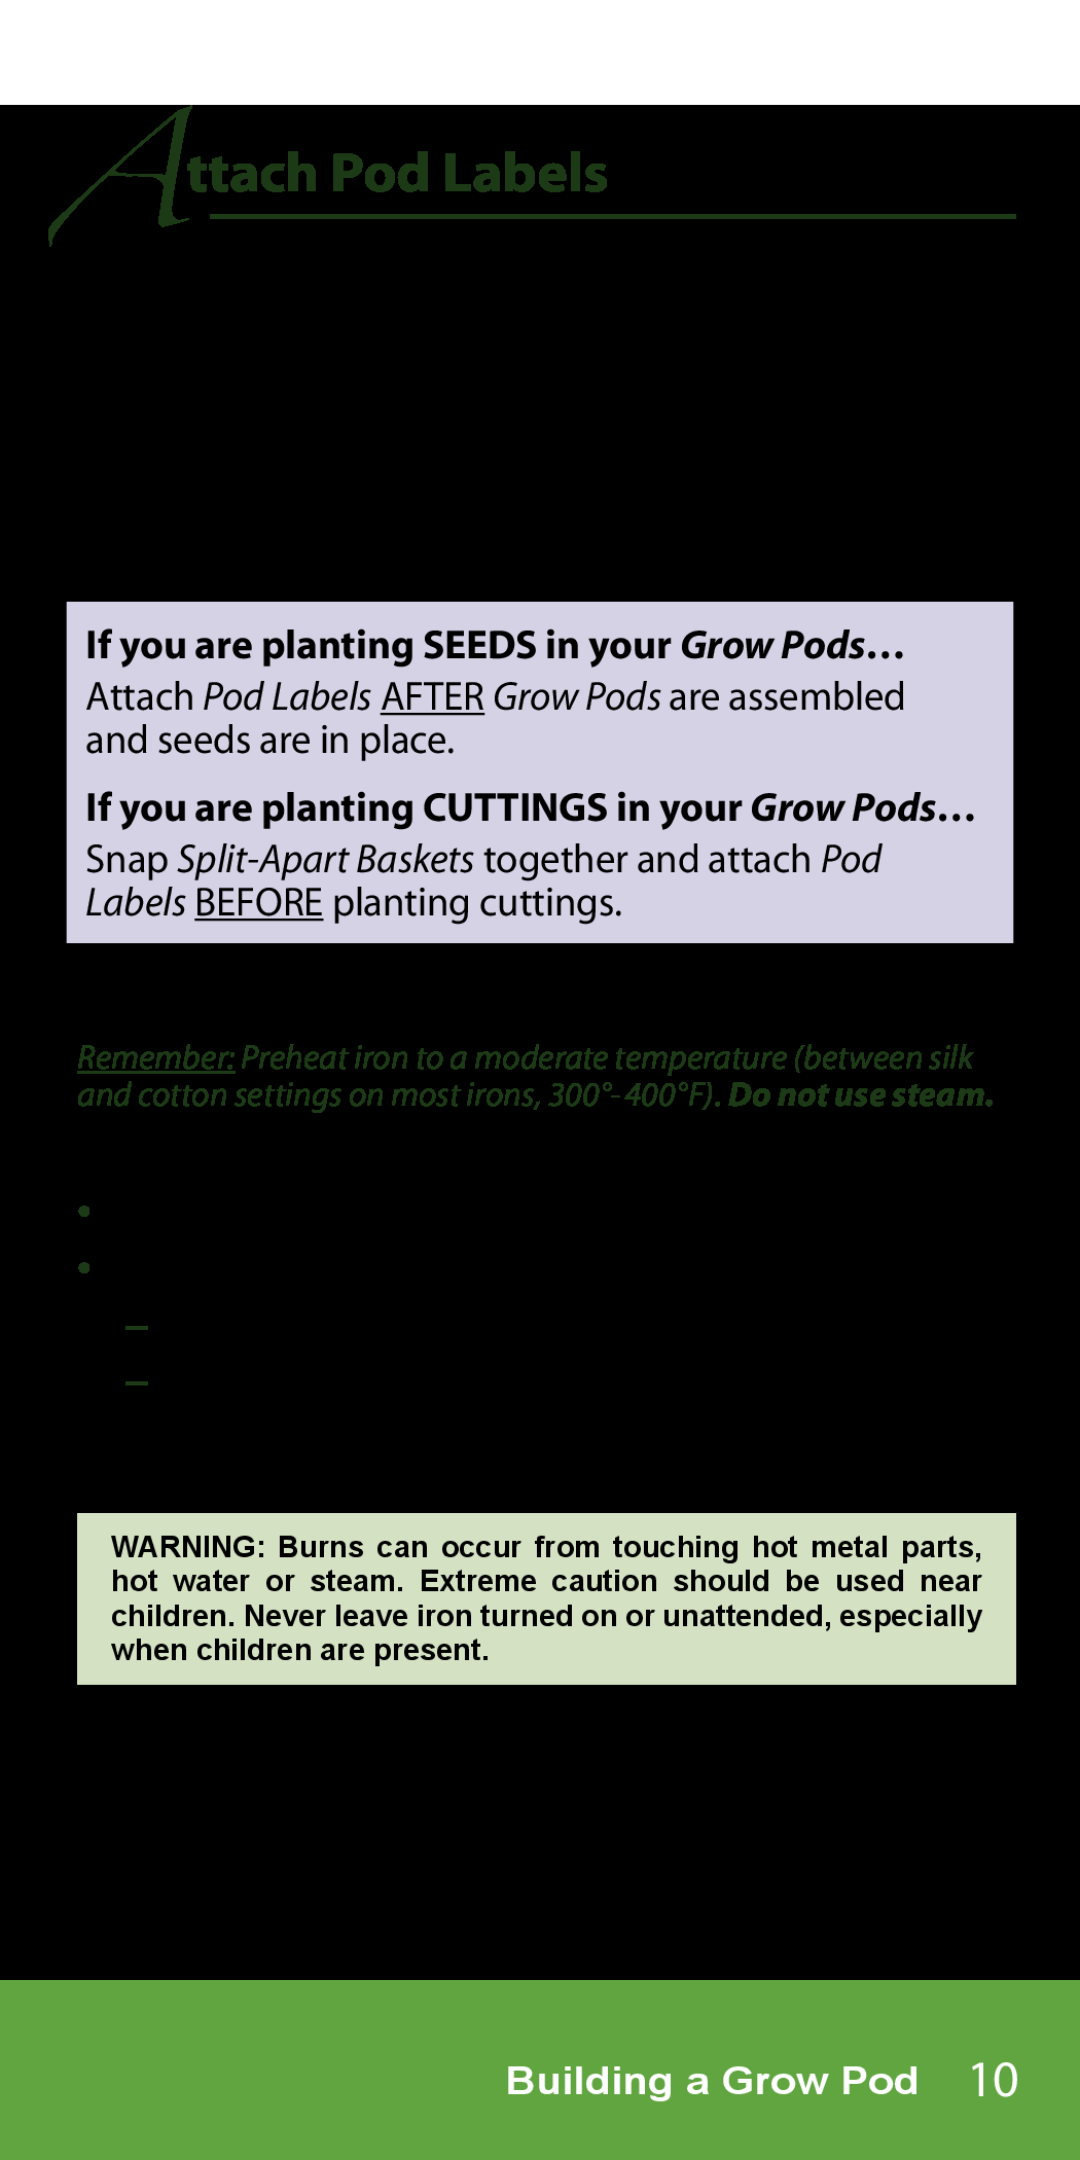 AeroGarden 1-Season, 7-Pod Attach Pod Labels, If you are planting SEEDS in your Grow Pods…, seconds with iron in one place 